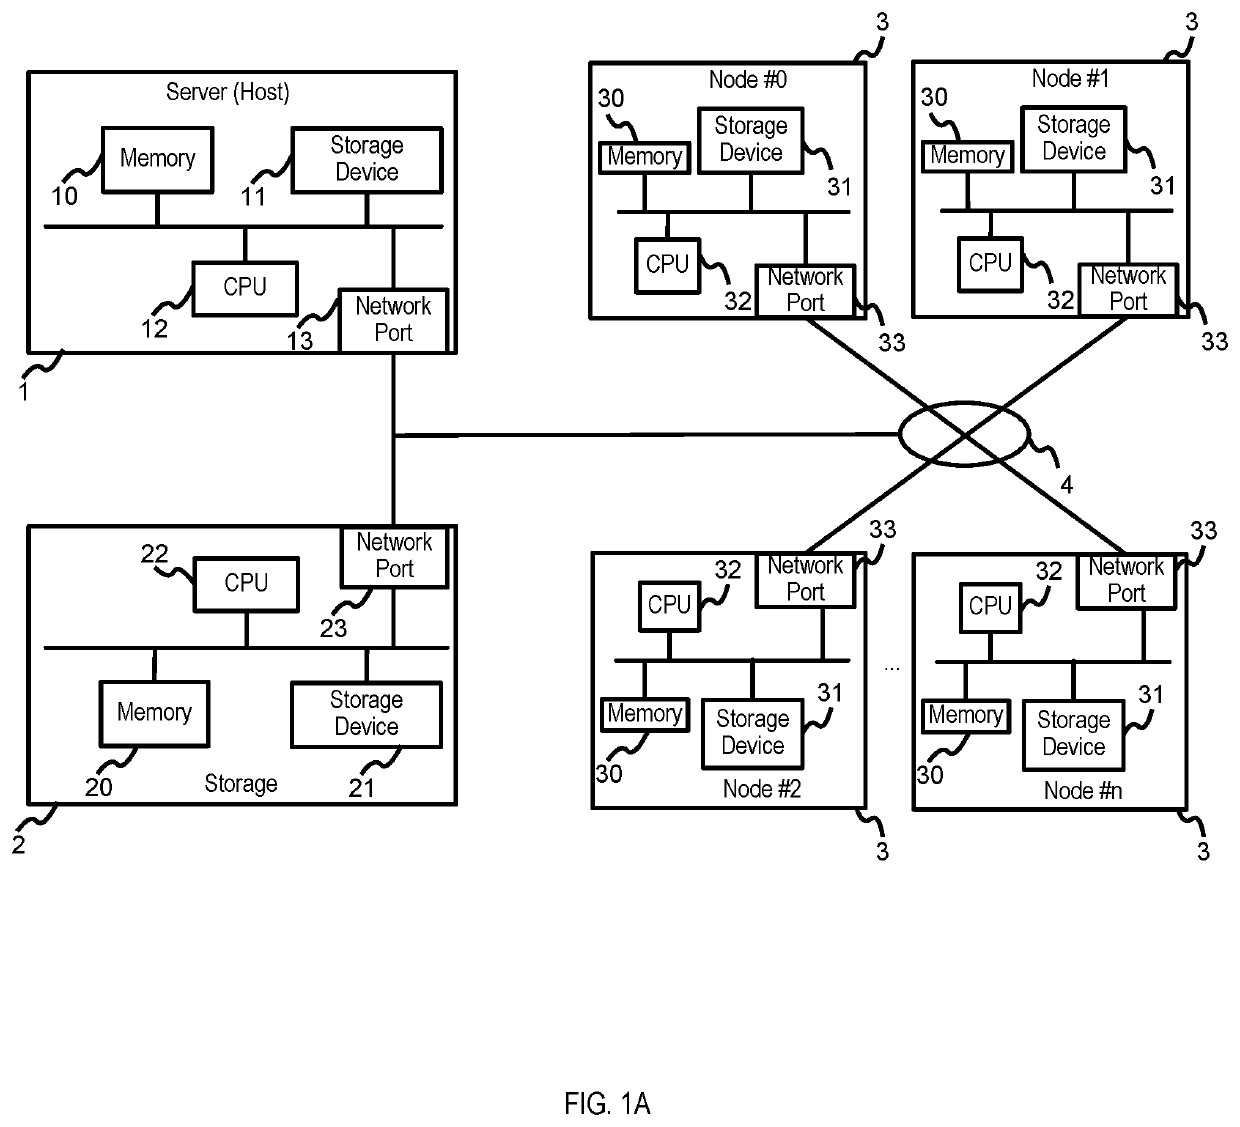 Method for latency improvement of storages using low cost hardware